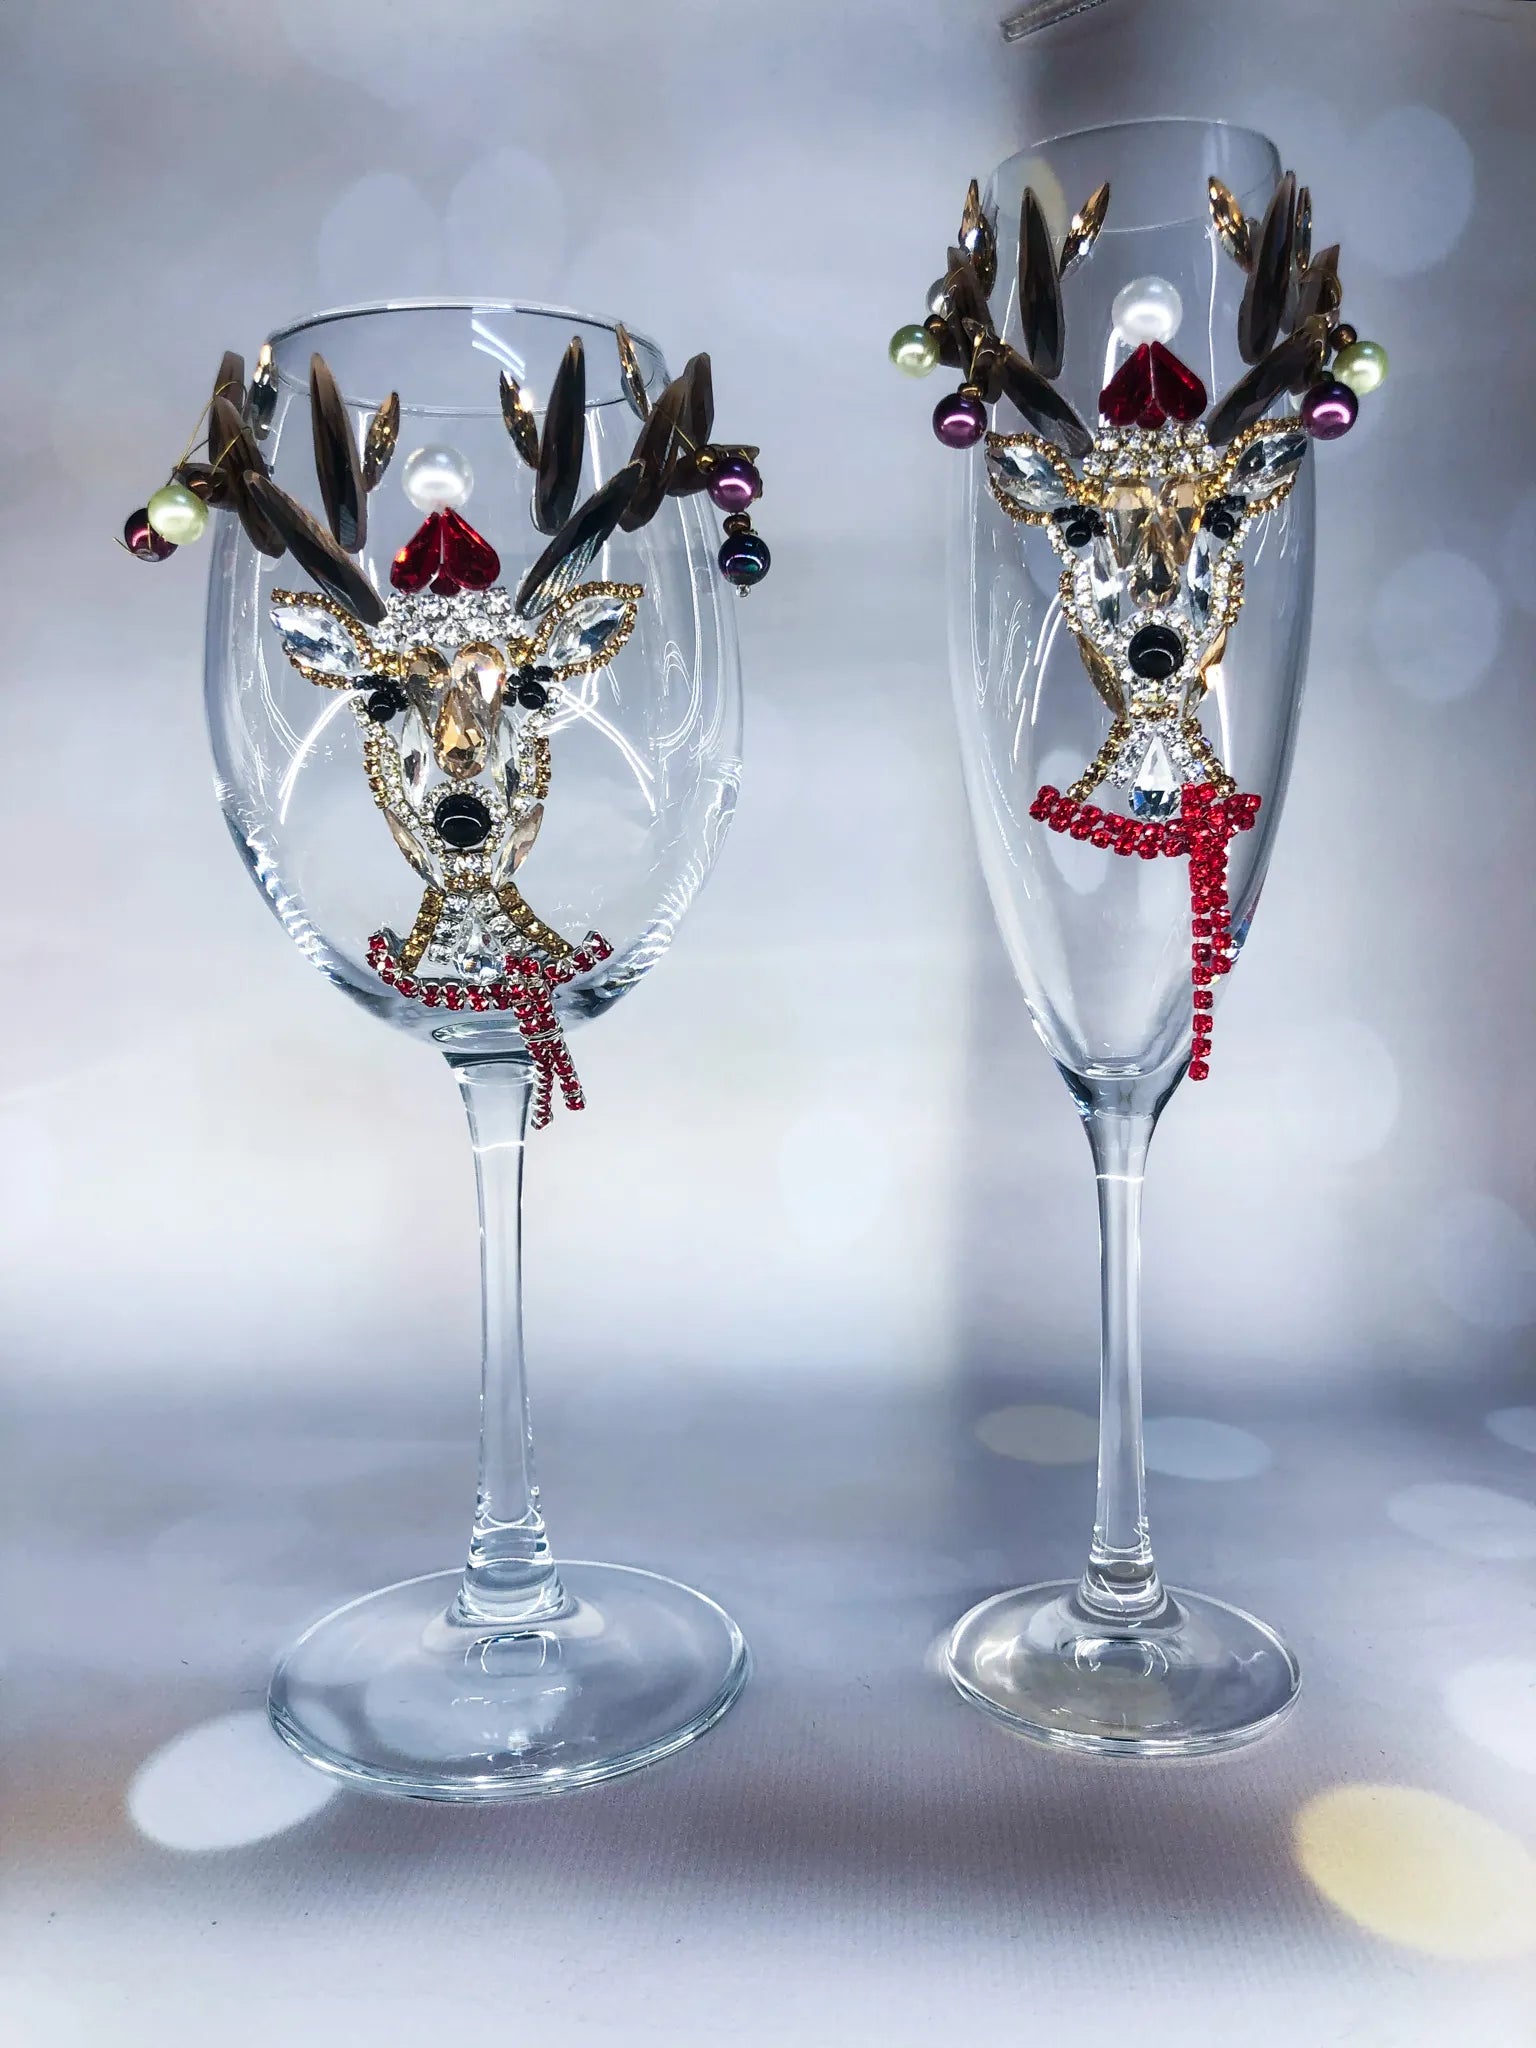 Festive holiday champagne flute